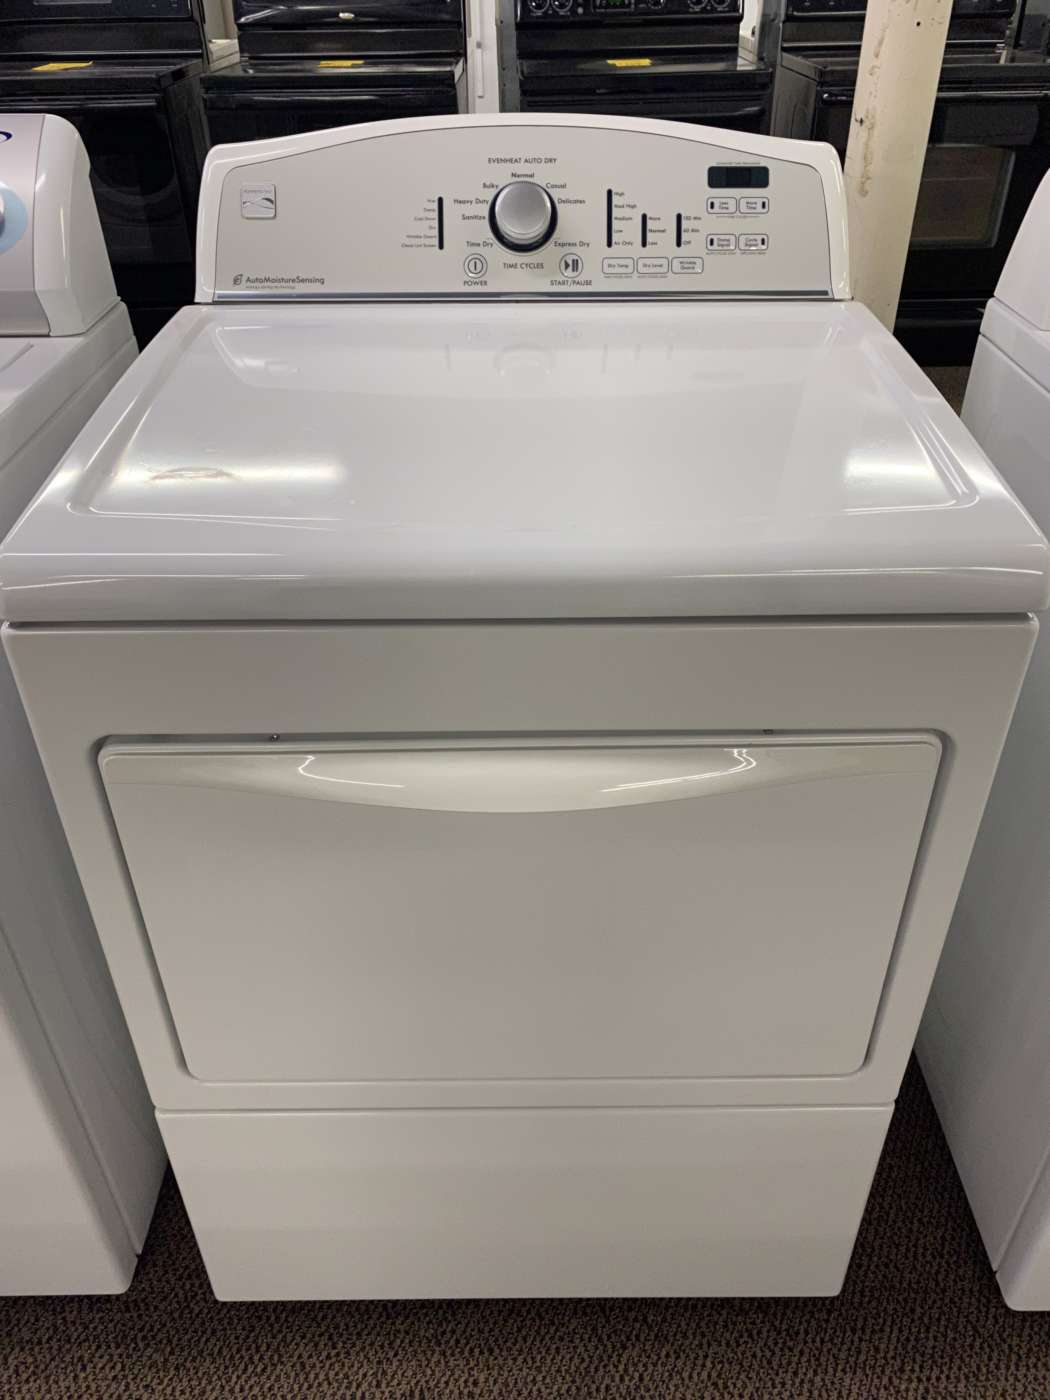 Reconditioned KENMORE 7.0 Cu. Ft. Electric Dryer – White